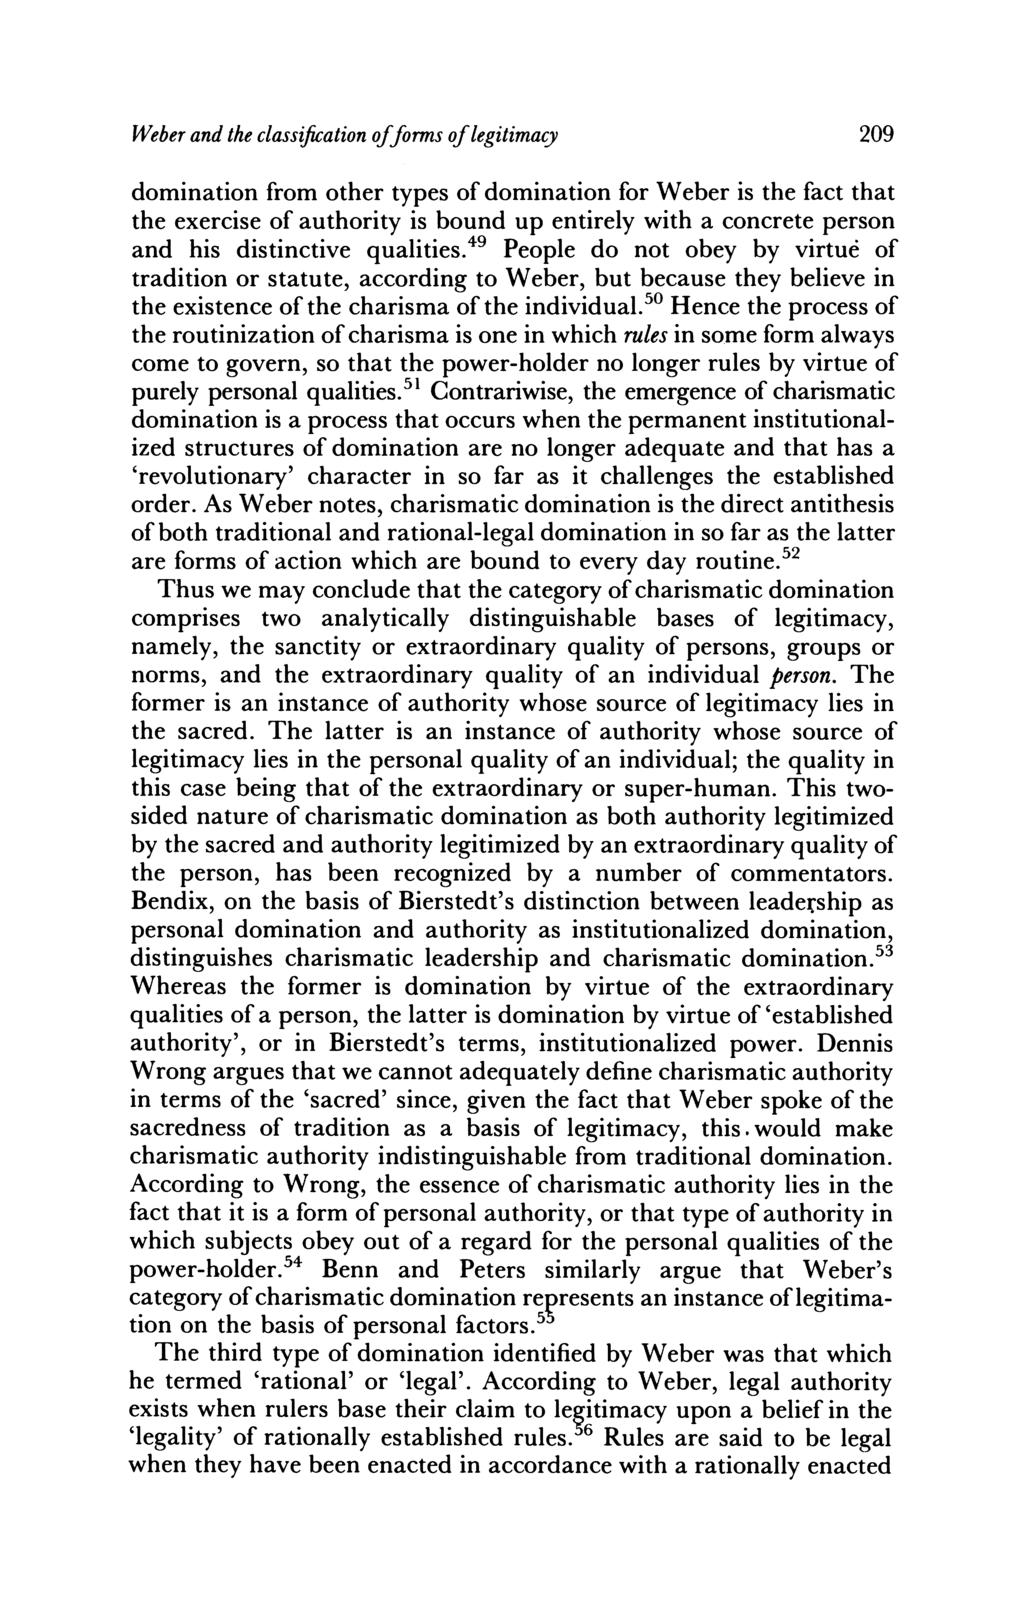 Weber and the classification offorms of legitimacw domination from other types of domination for Weber is the fact that the exercise of authority is bound up entirely with a concrete person and his